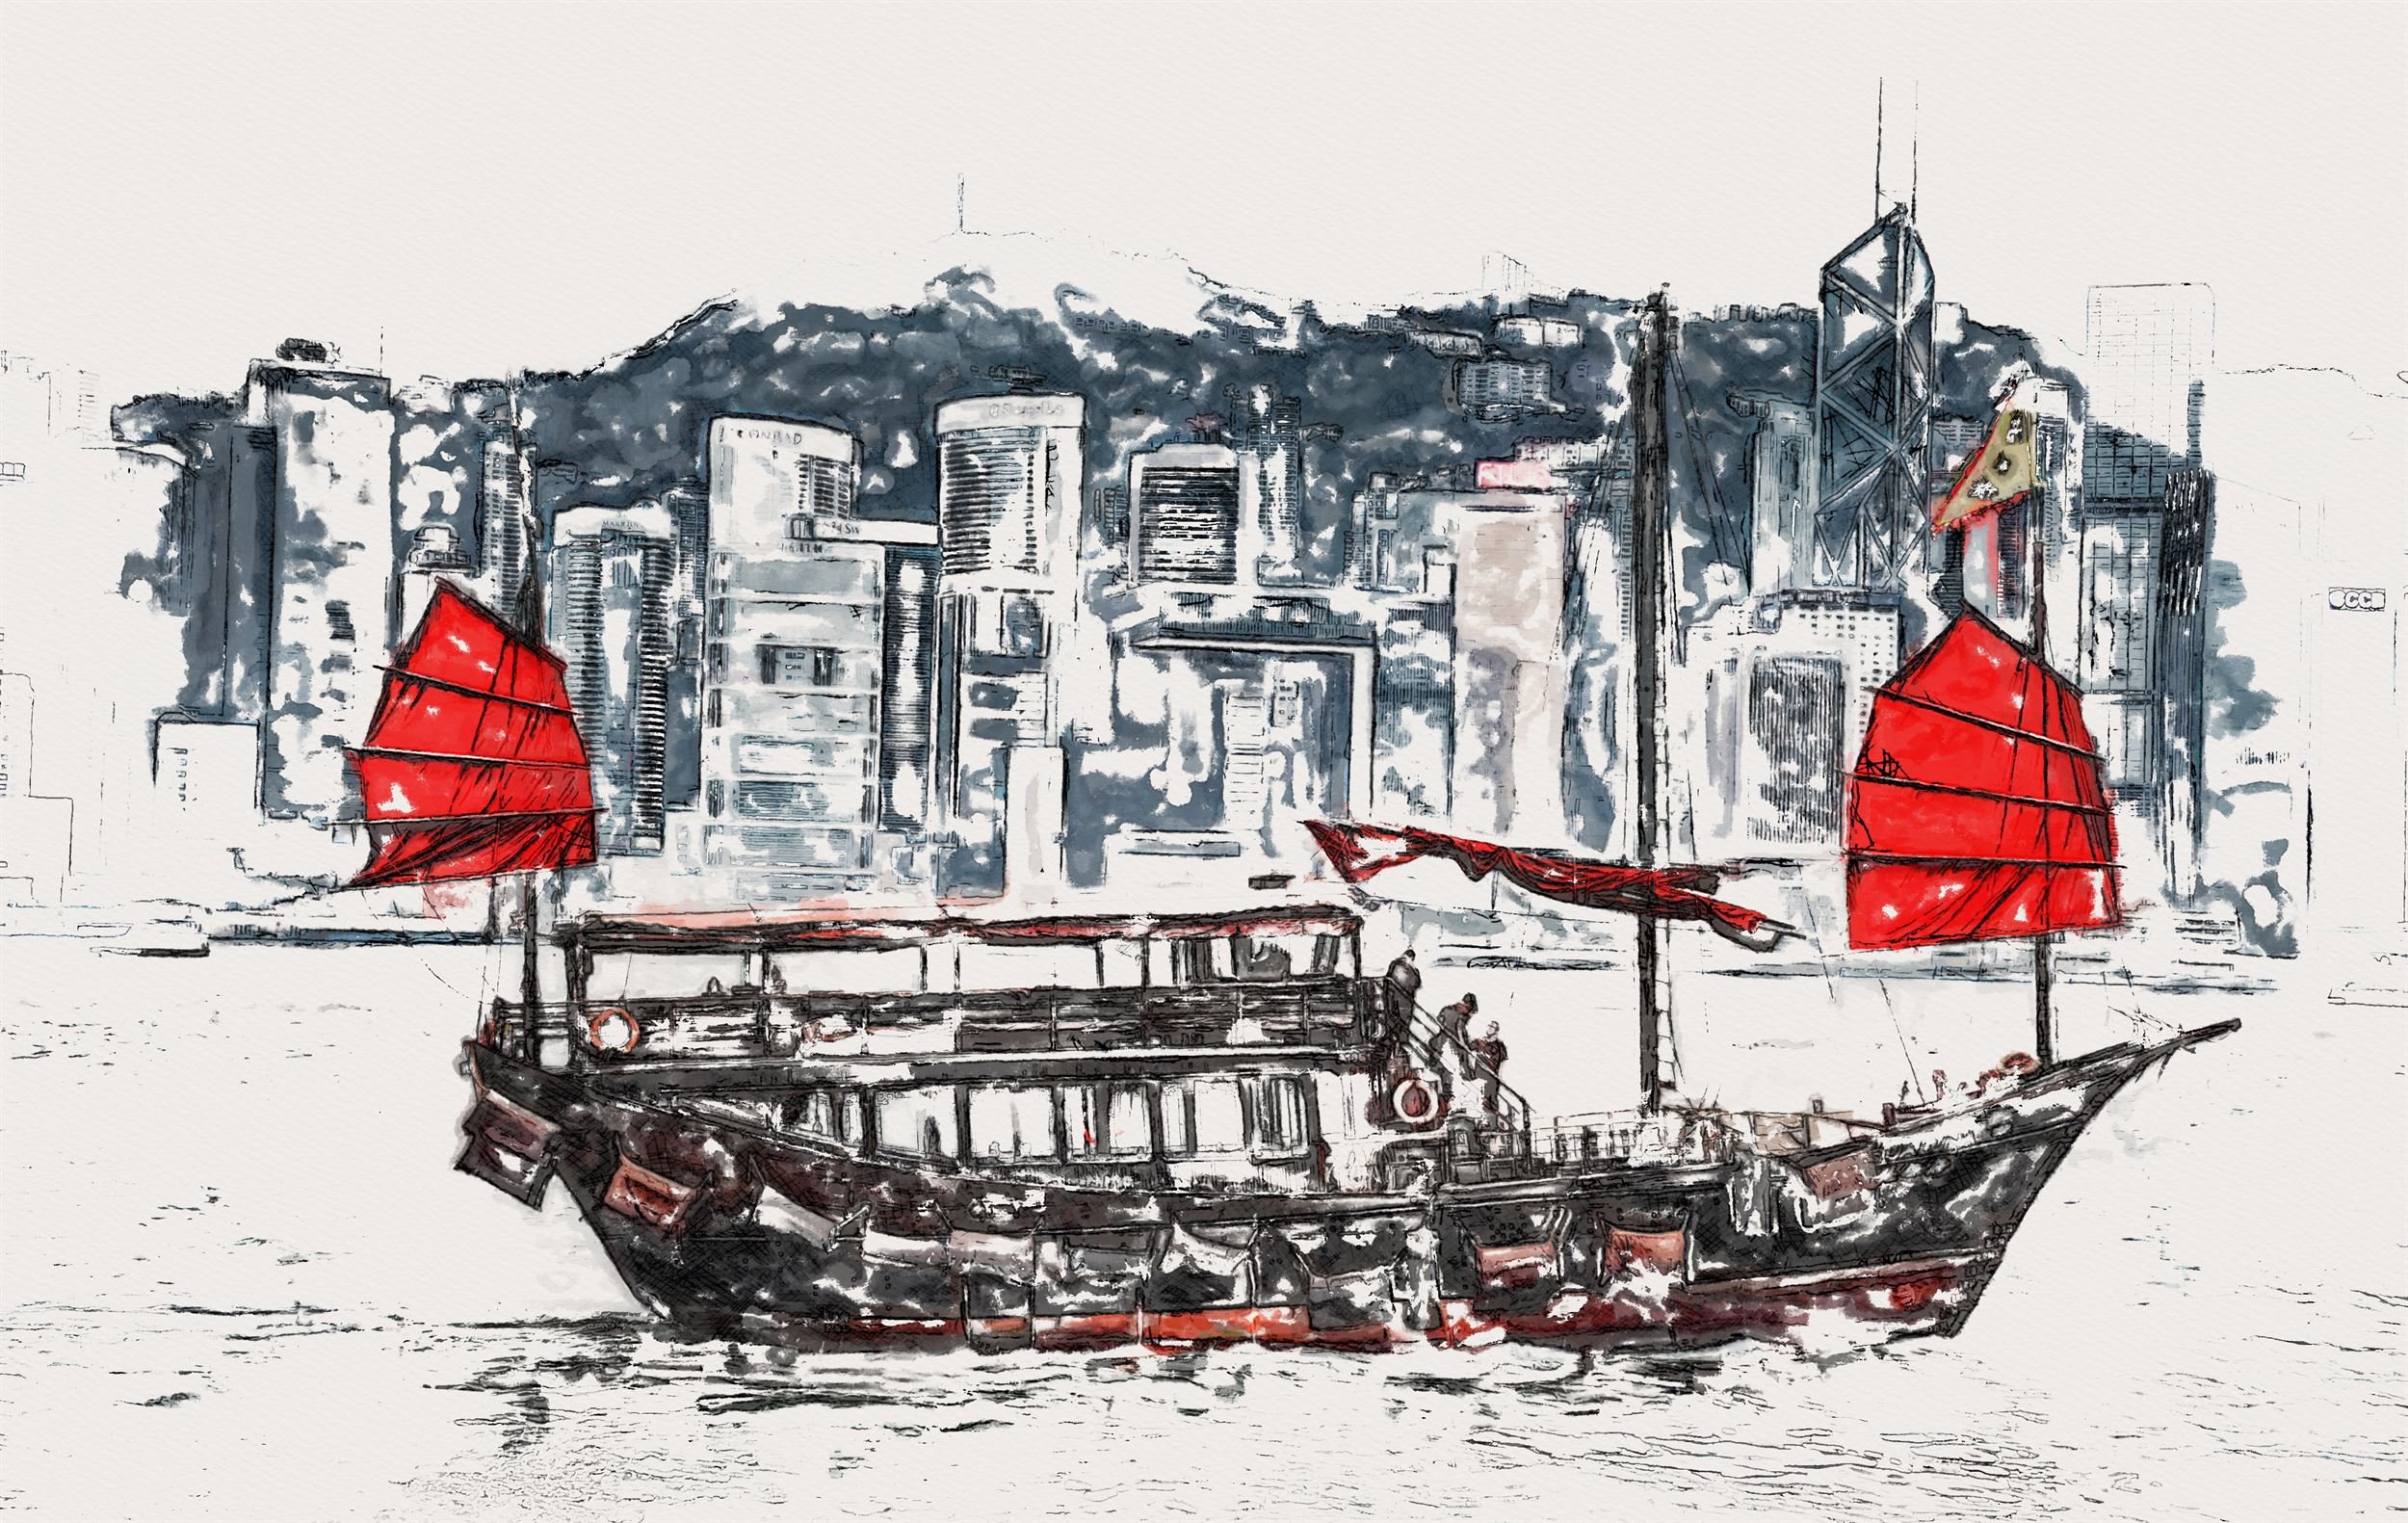 Watercolor Sketch Photo Effect - red and black boat image example.